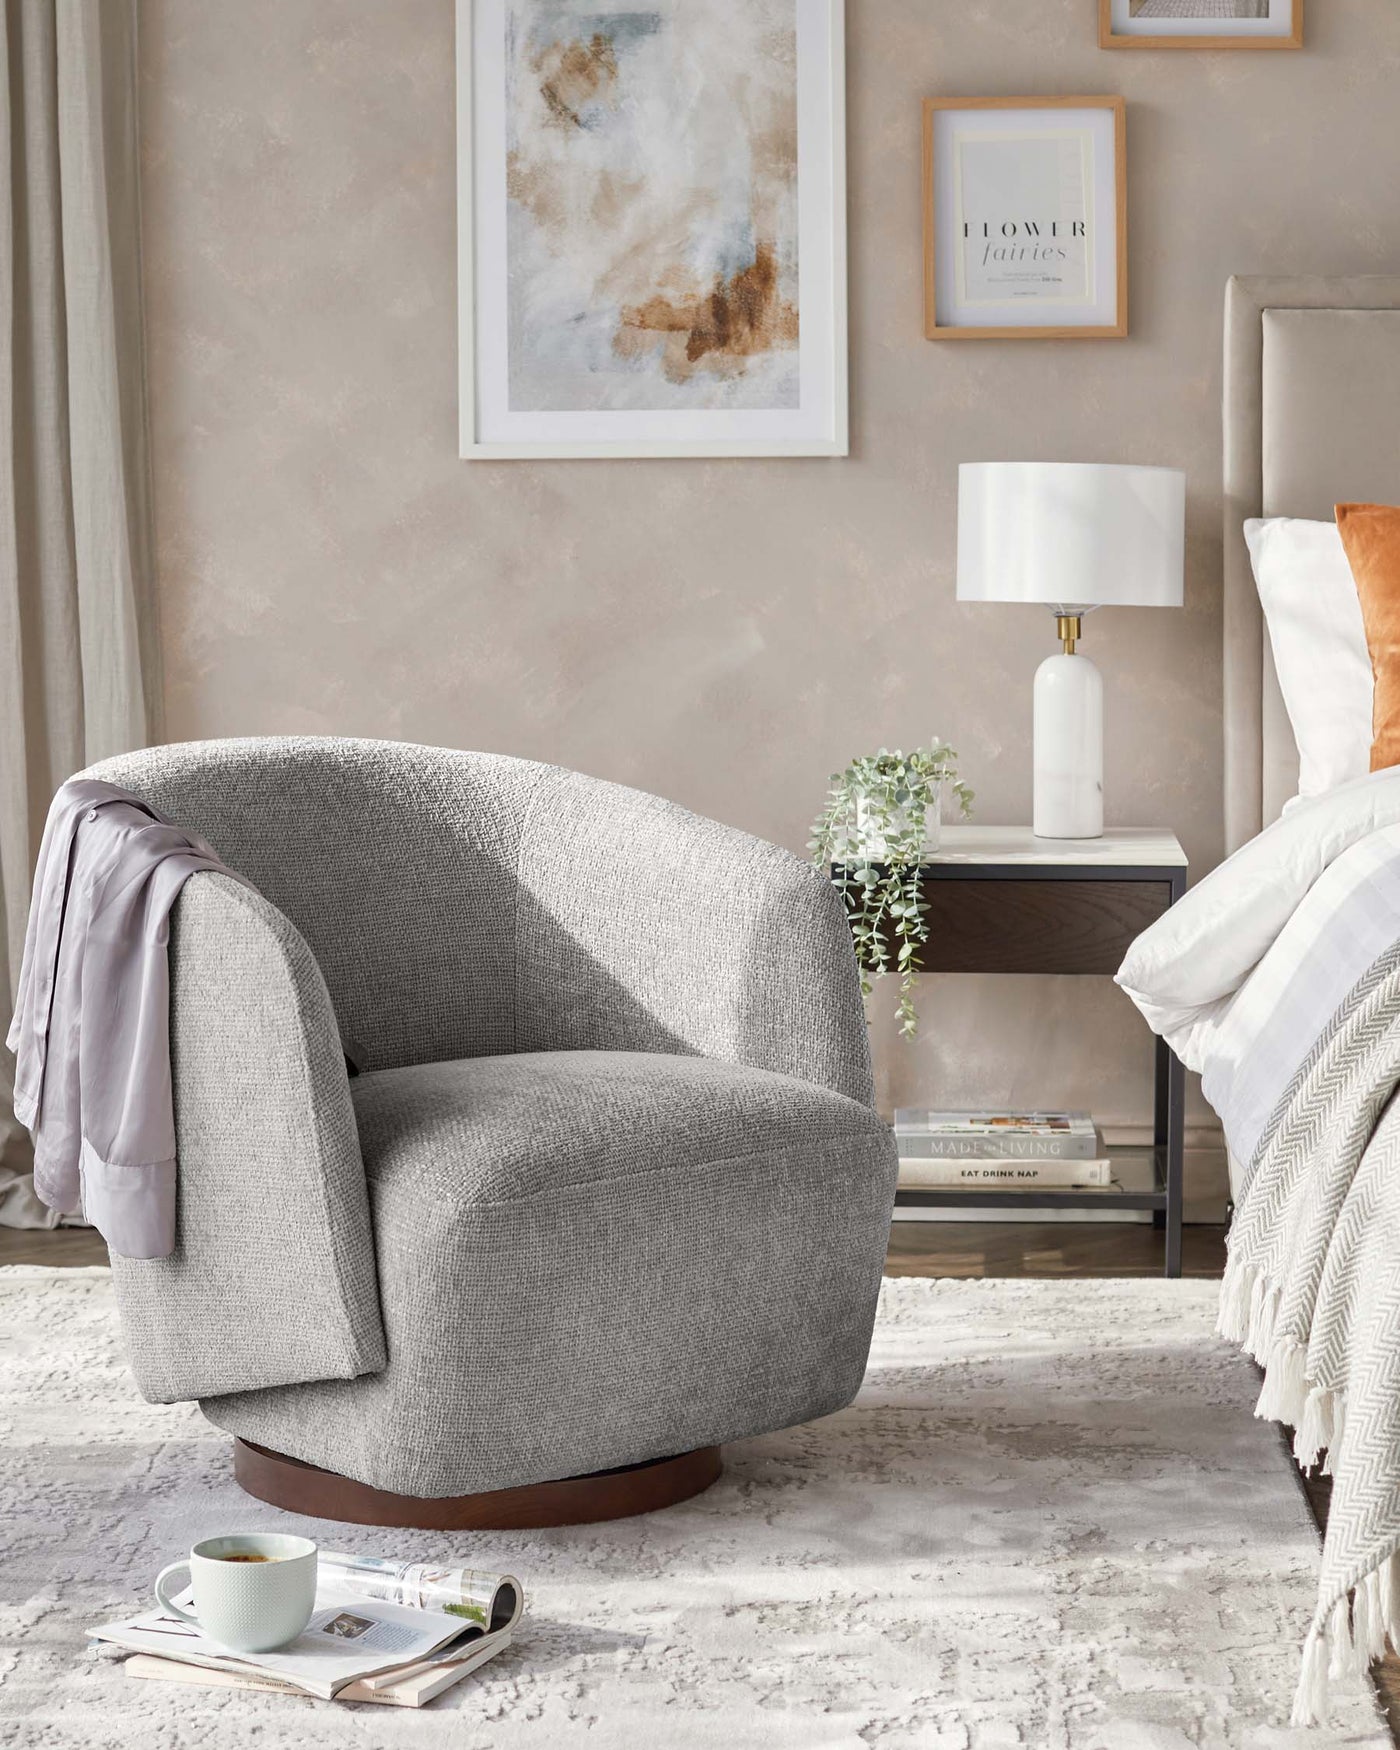 Contemporary plush grey fabric armchair with a curved back, wide seat, and dark wood base. Beside it, a sleek white side table with a lower shelf holding decorative items, topped with a modern white lamp with a cylindrical shade. An off-white textured throw is draped over the arm of the chair, and a light carpet beneath adds warmth to the scene.